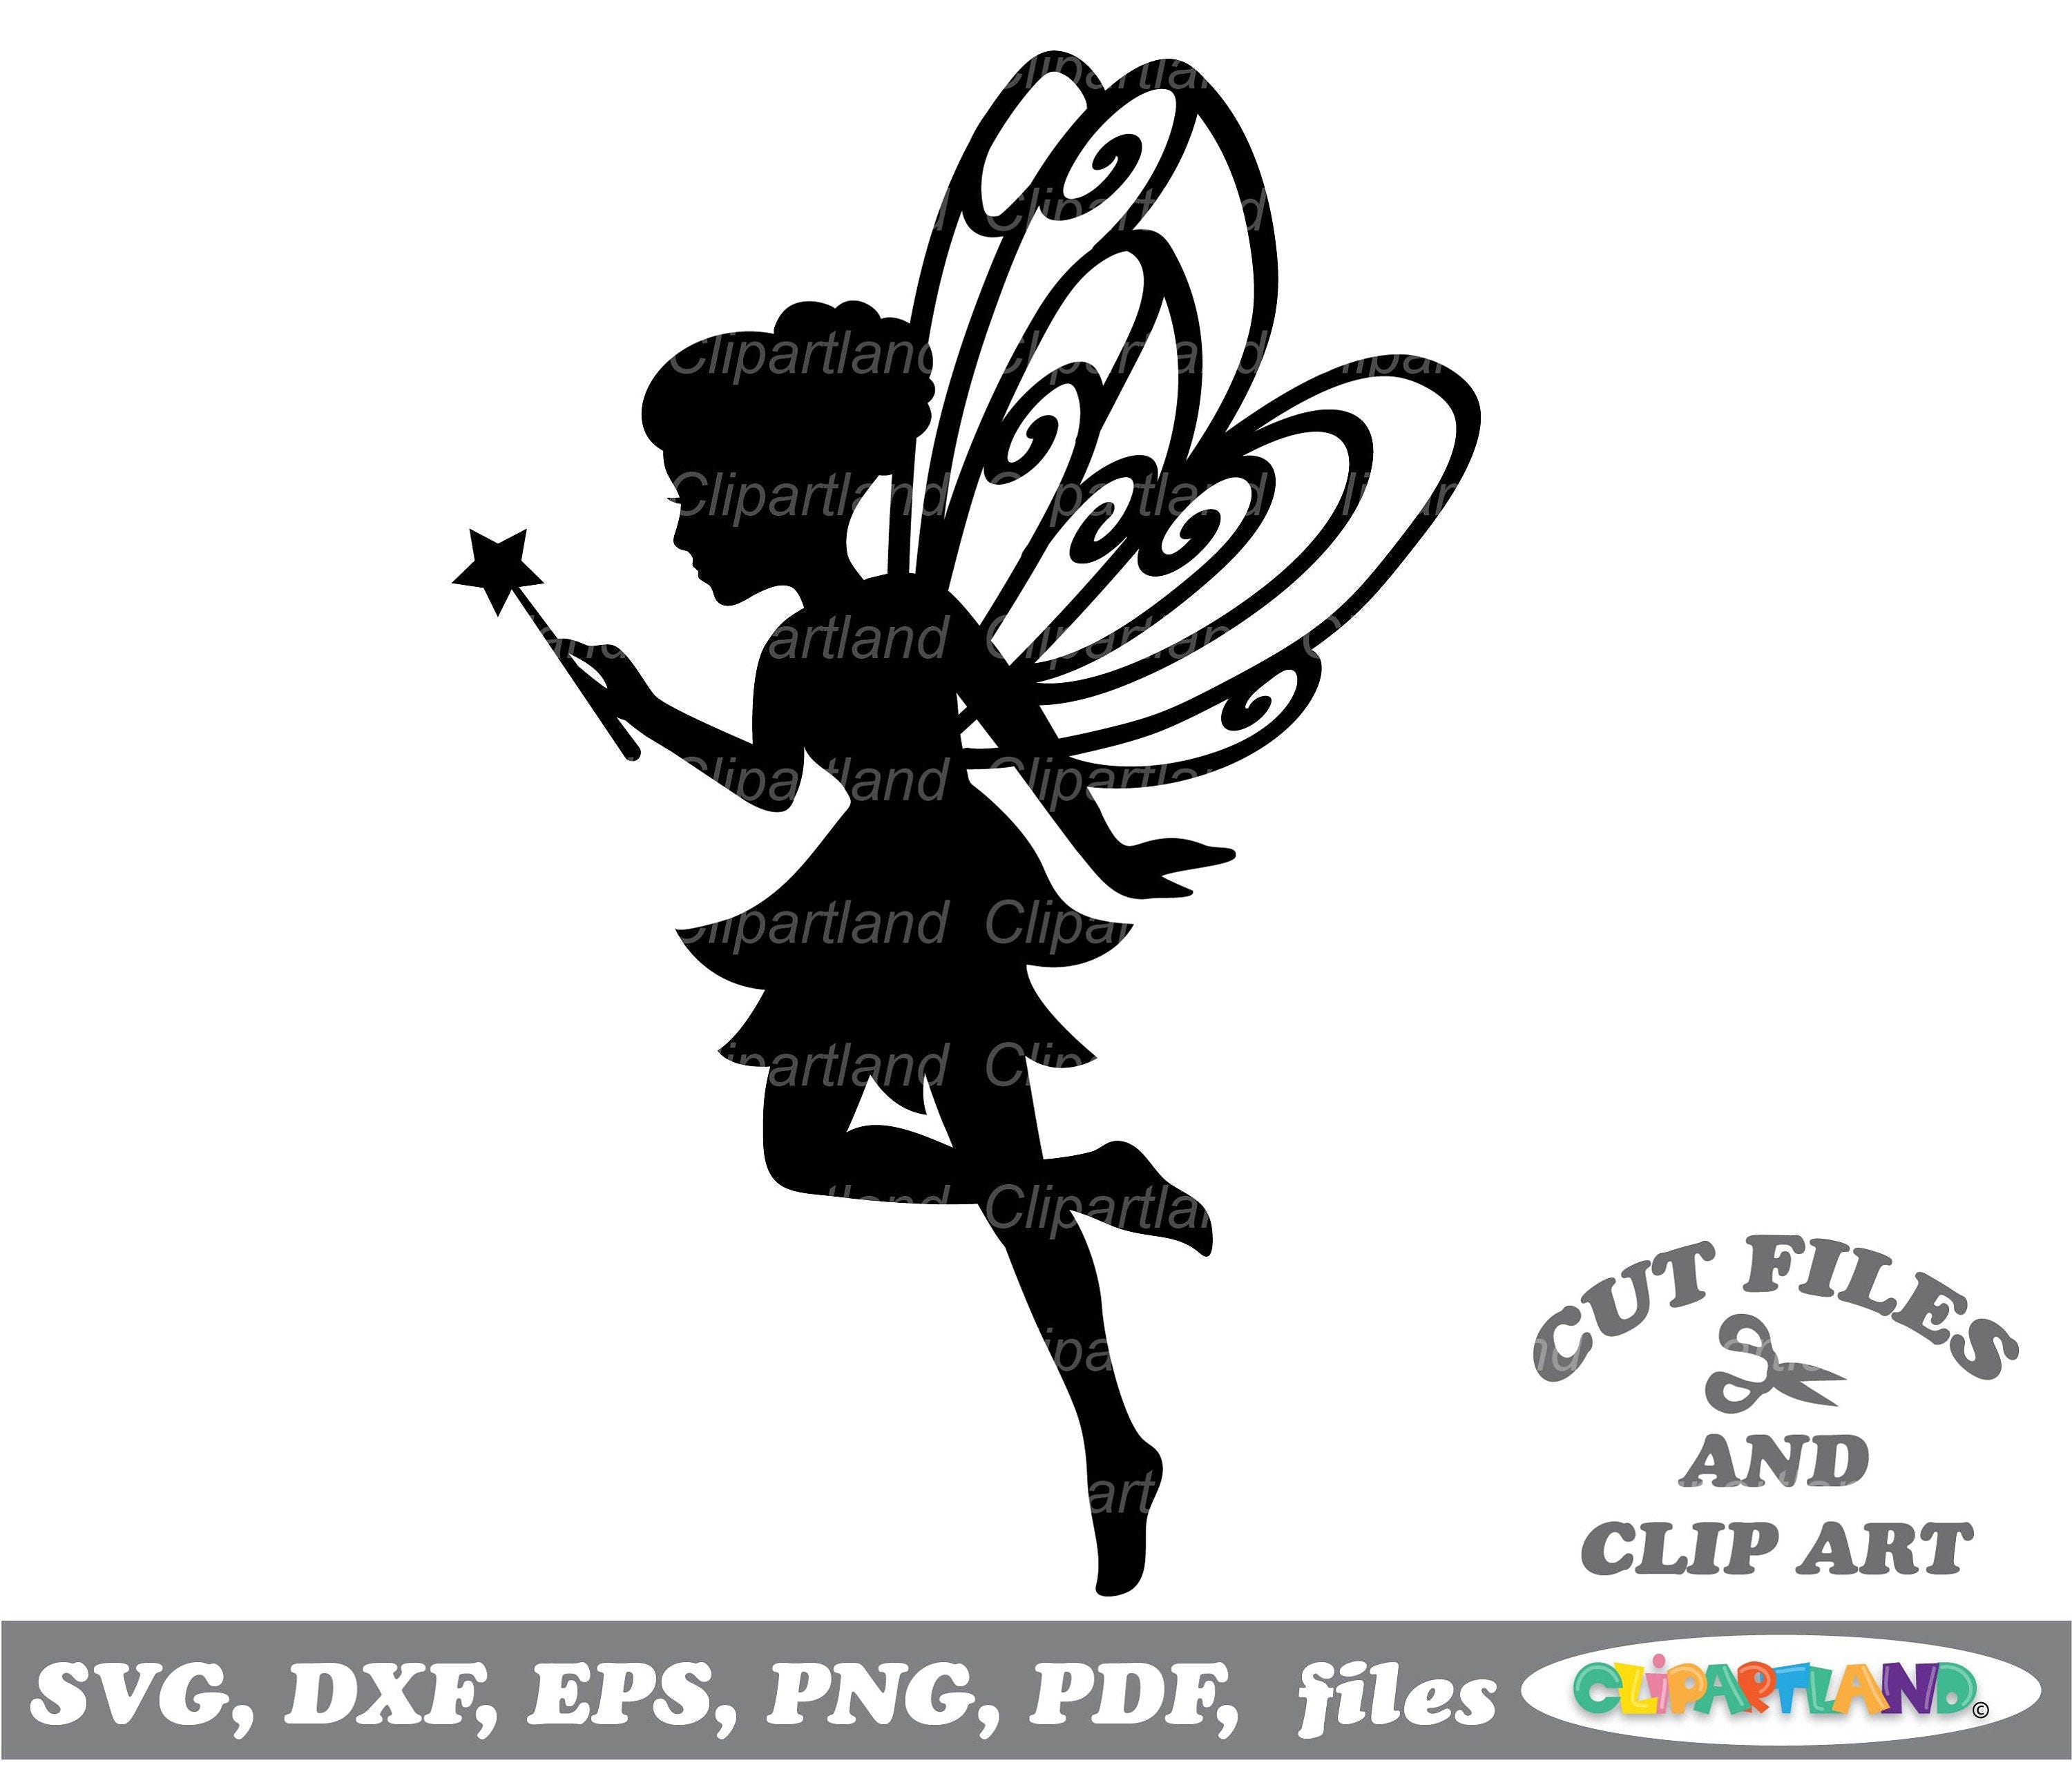 INSTANT Download. Commercial license is included up to 500 uses! Cute garden fairy silhouette svg cut file and clip art. F_5.